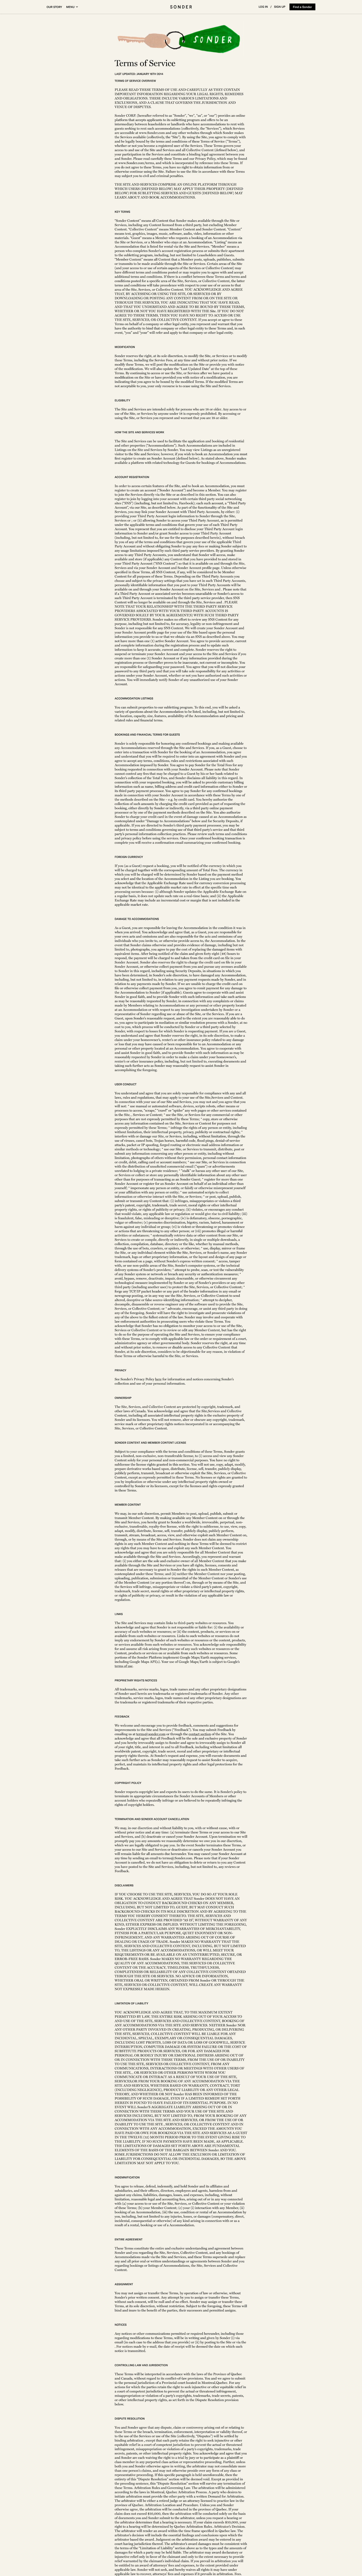 Screenshot of the Terms of Service page from the Sonder website.